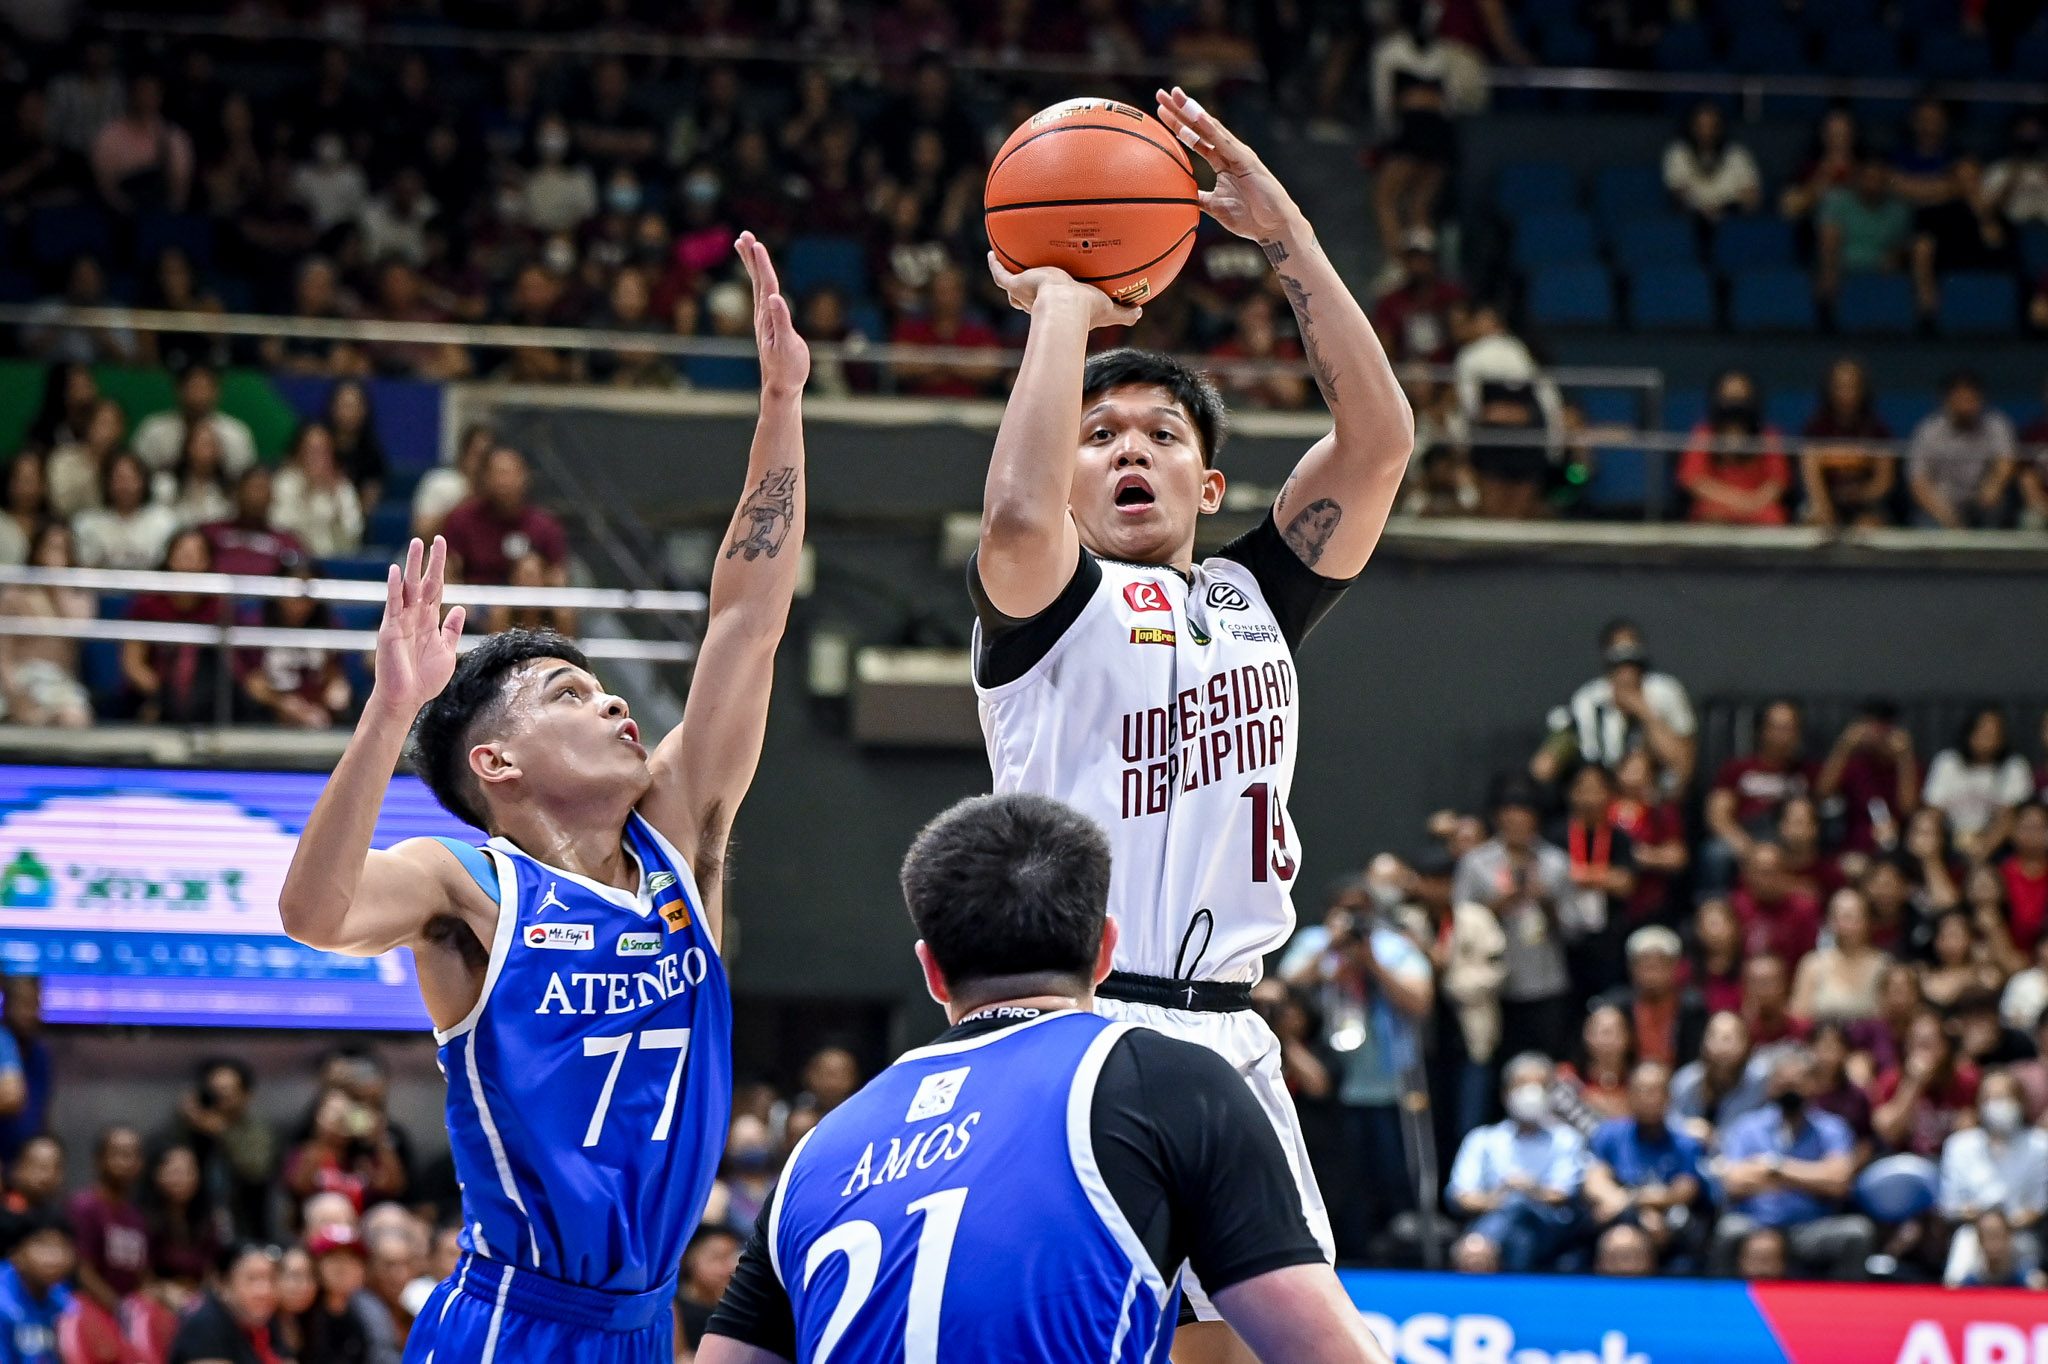 Abadiano-led UP exacts revenge over Ateneo, keeps solo 1st in another close thriller